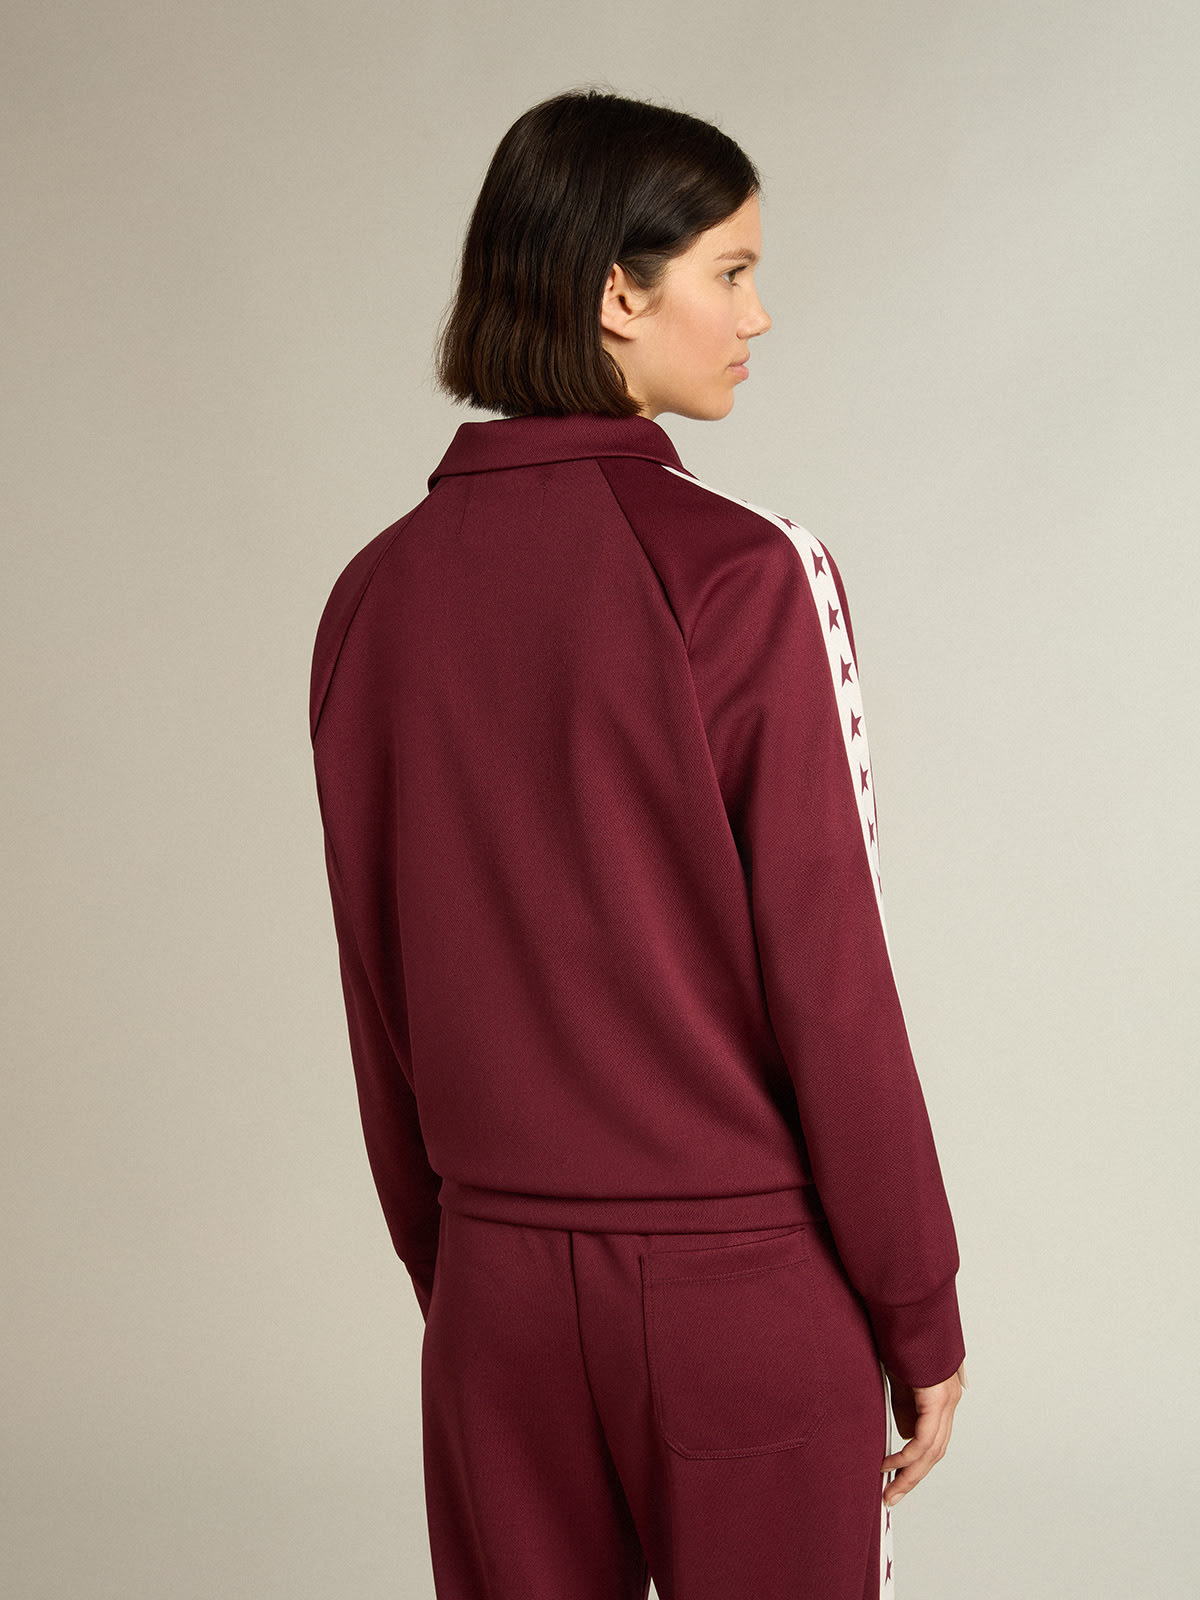 Golden Goose - Women’s burgundy zipped sweatshirt with white strip and contrasting stars in 